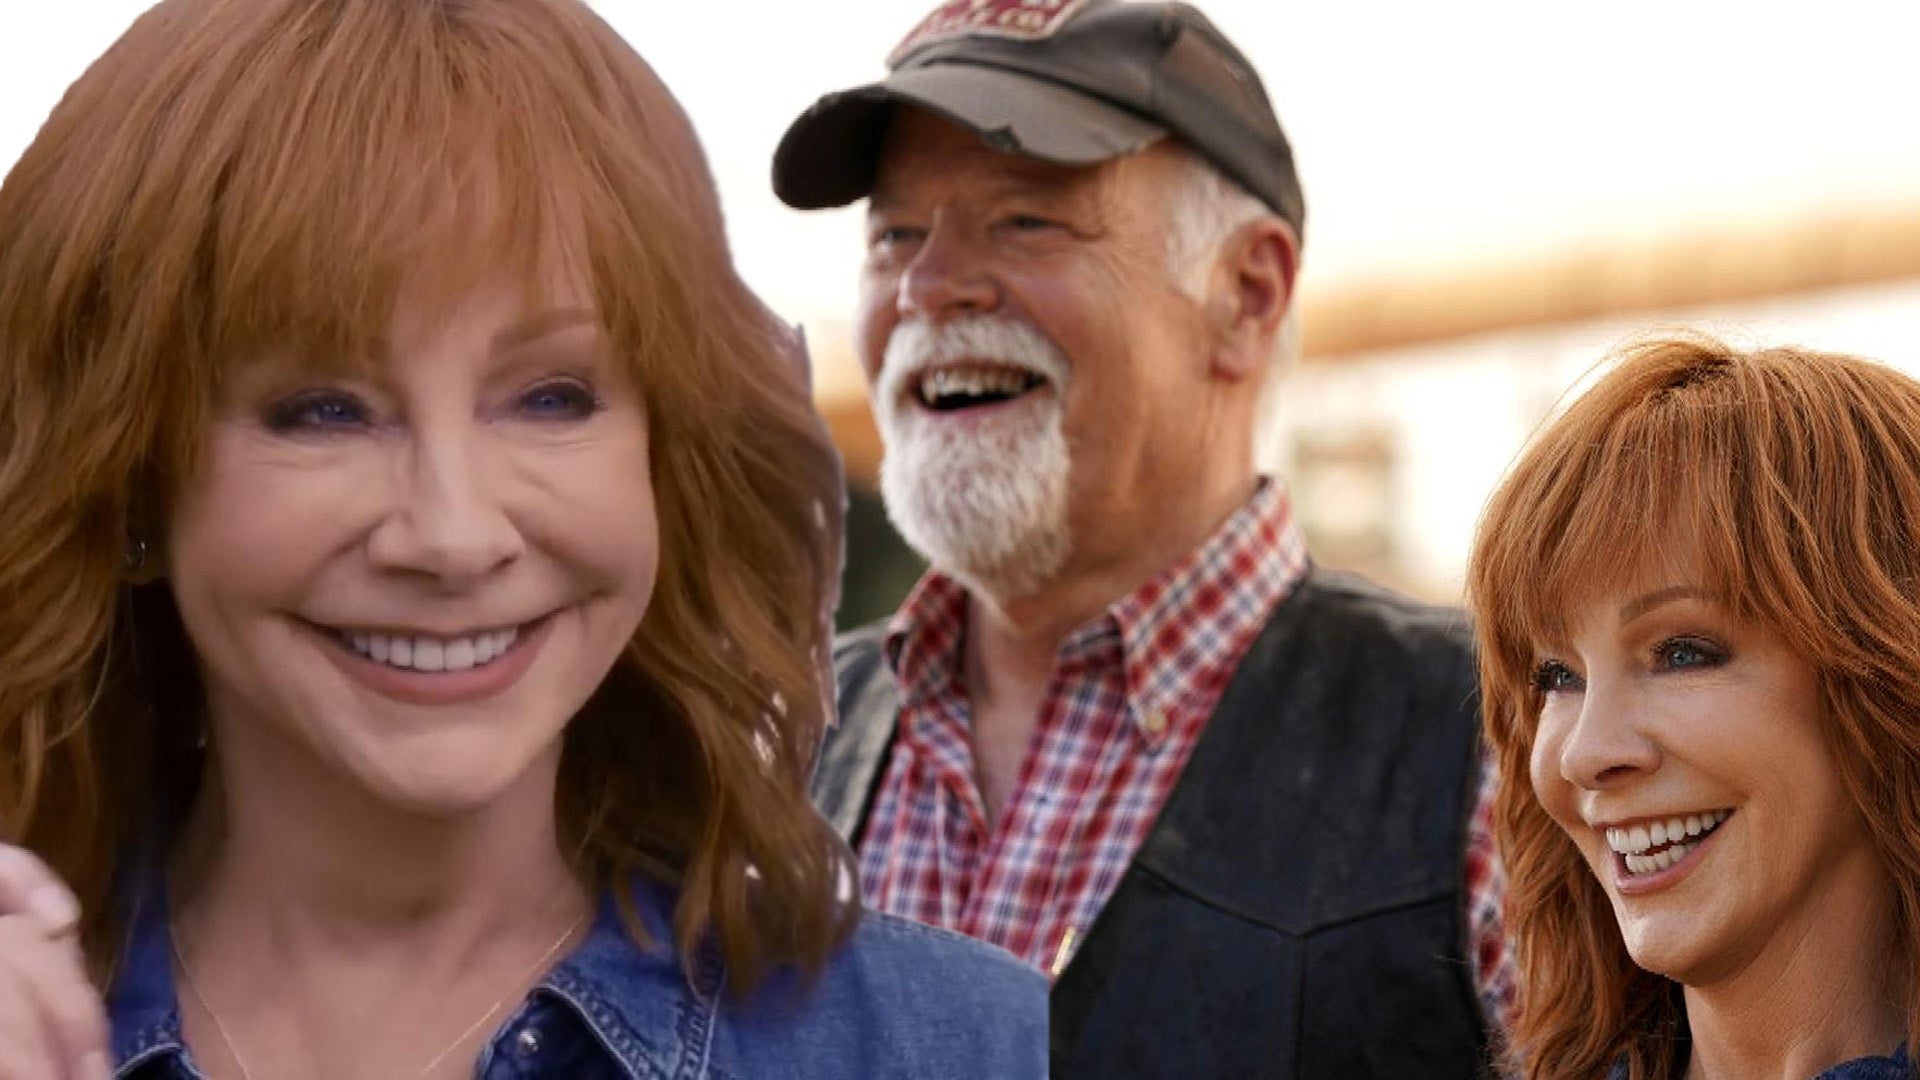 ‘Big Sky’: Reba McEntire on Joining Season 3 and Working With Boyfriend Rex Linn (Exclusive)